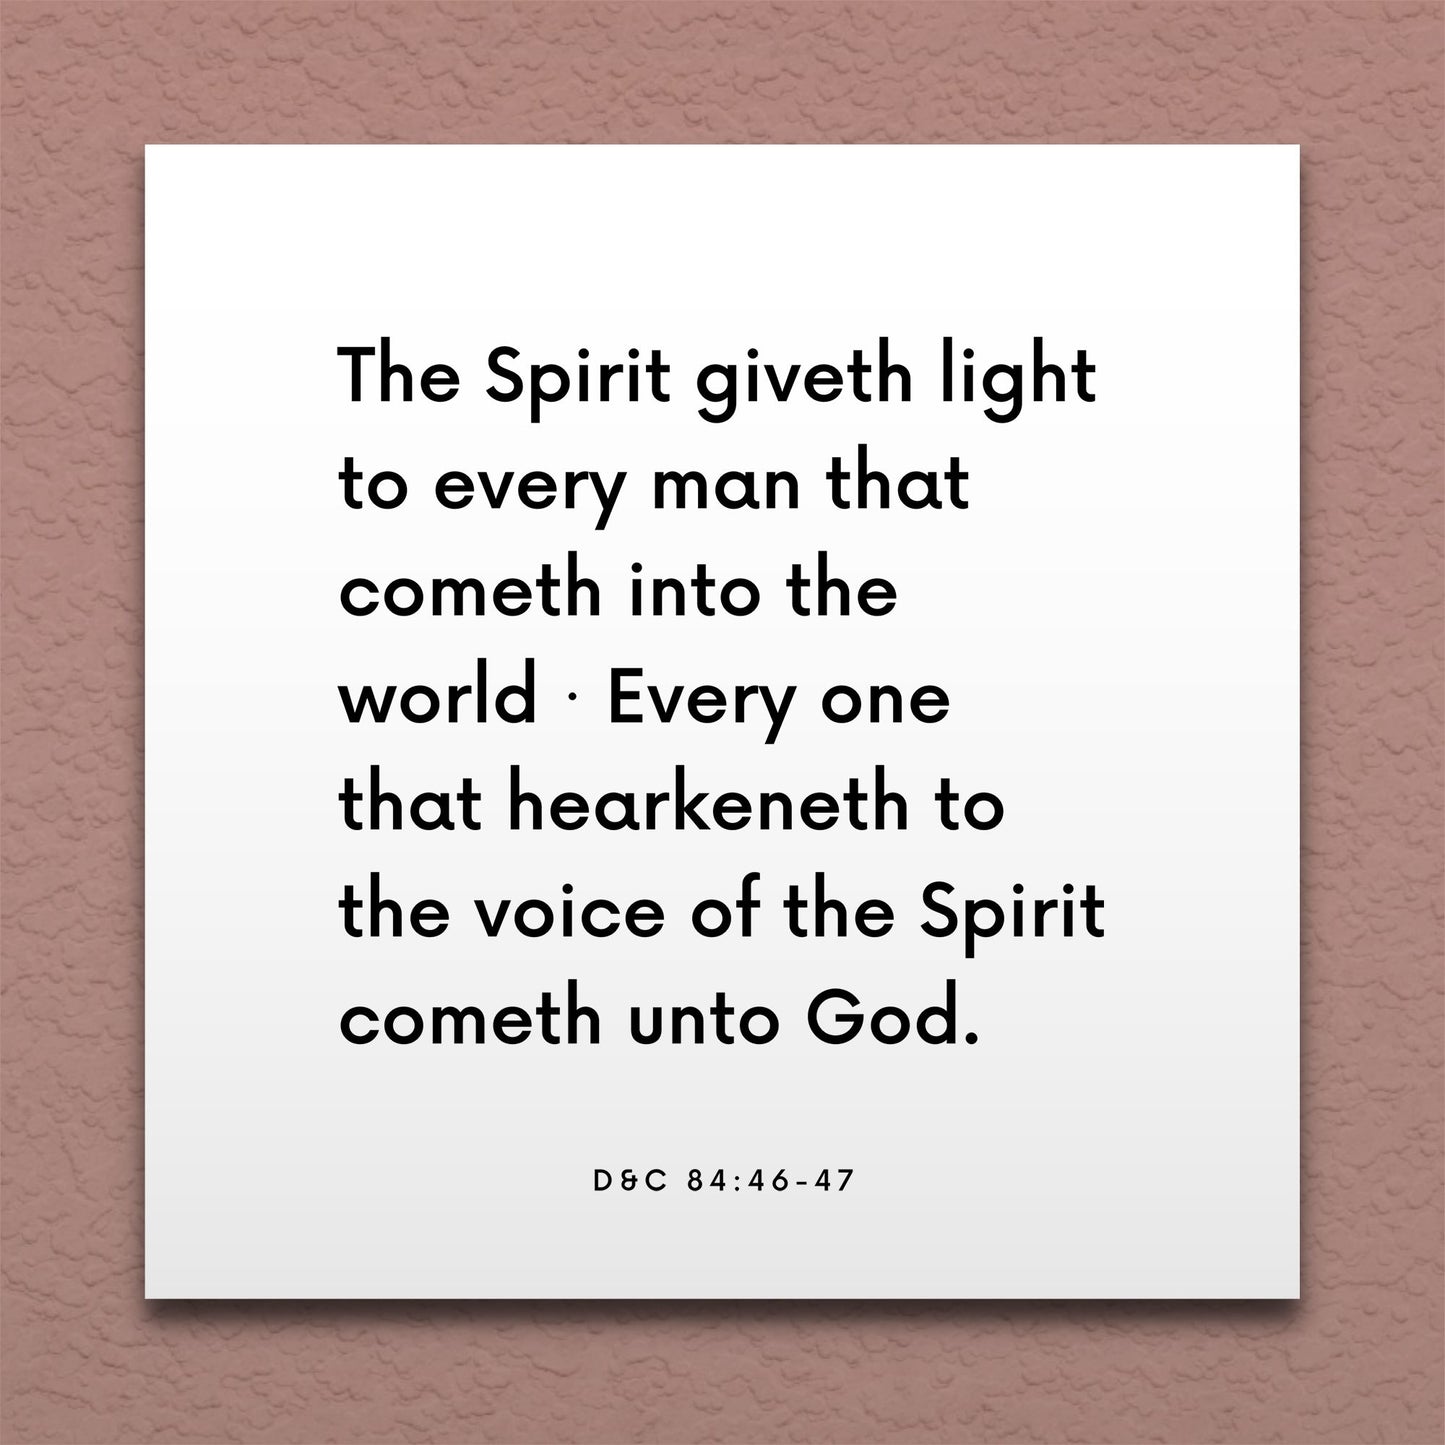 Wall-mounted scripture tile for D&C 84:46-47 - "The Spirit giveth light to every man"